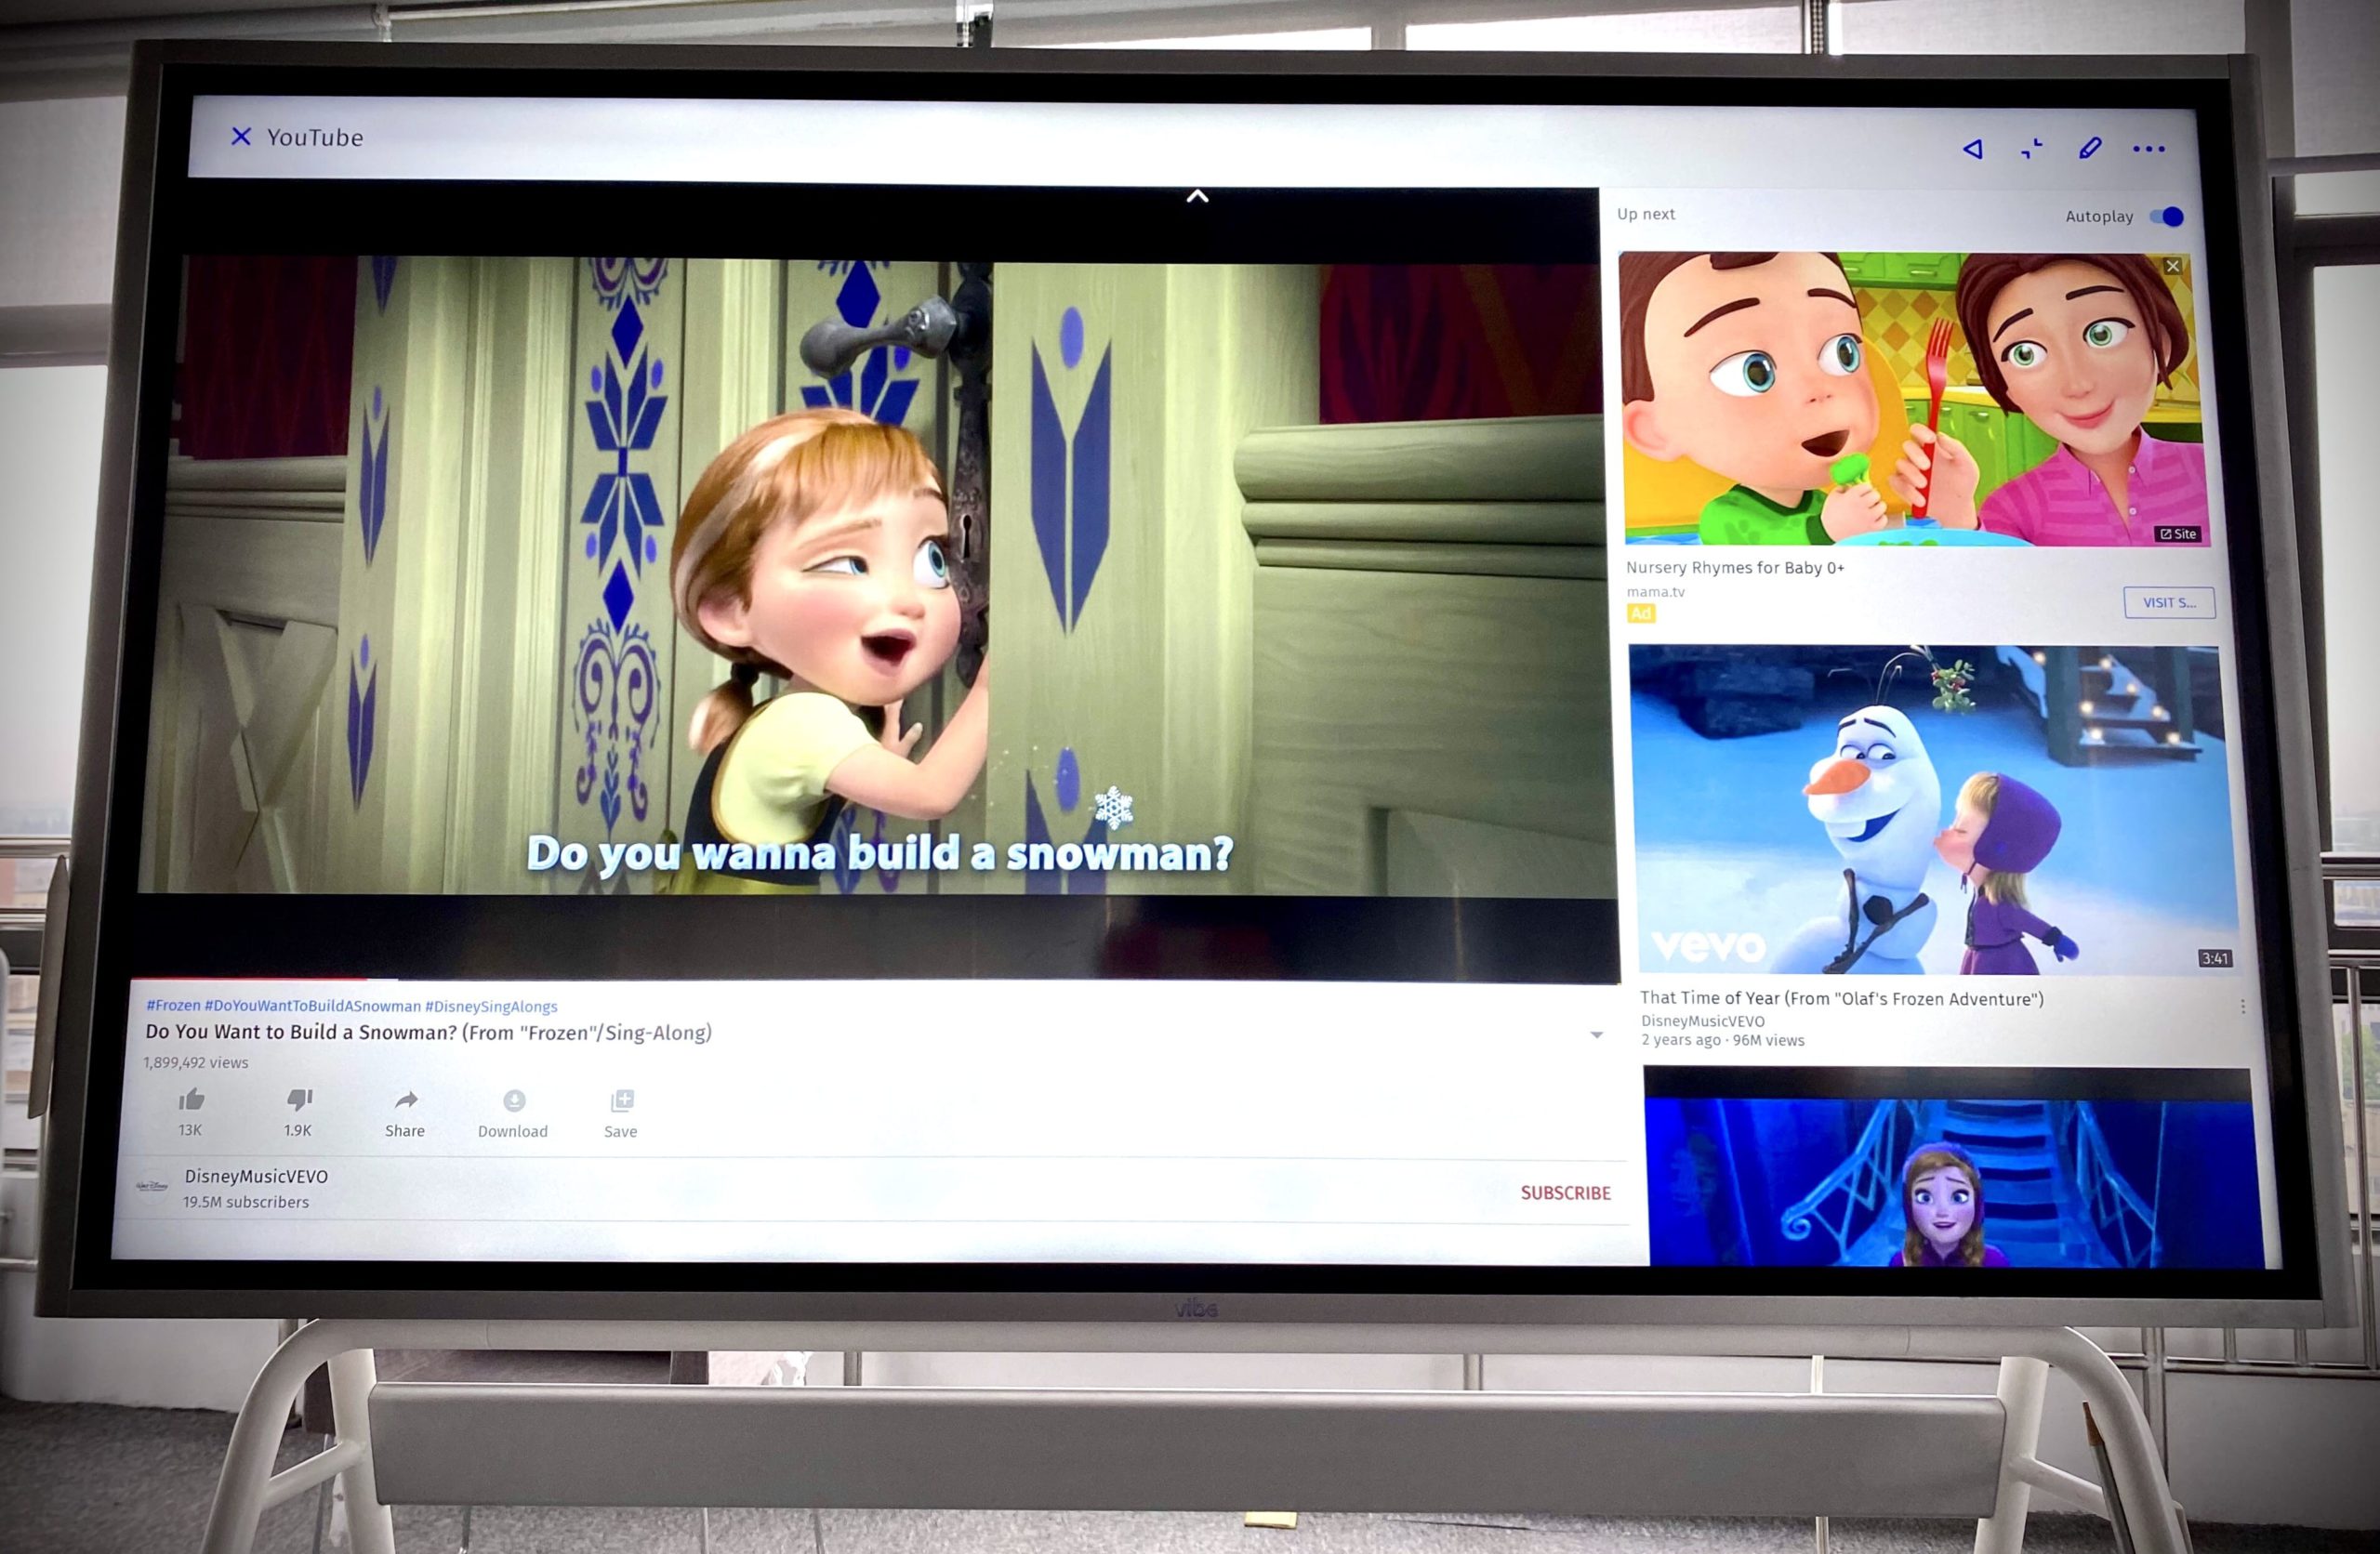 With its large library of app integrations, Vibe is a great smart board for kids.